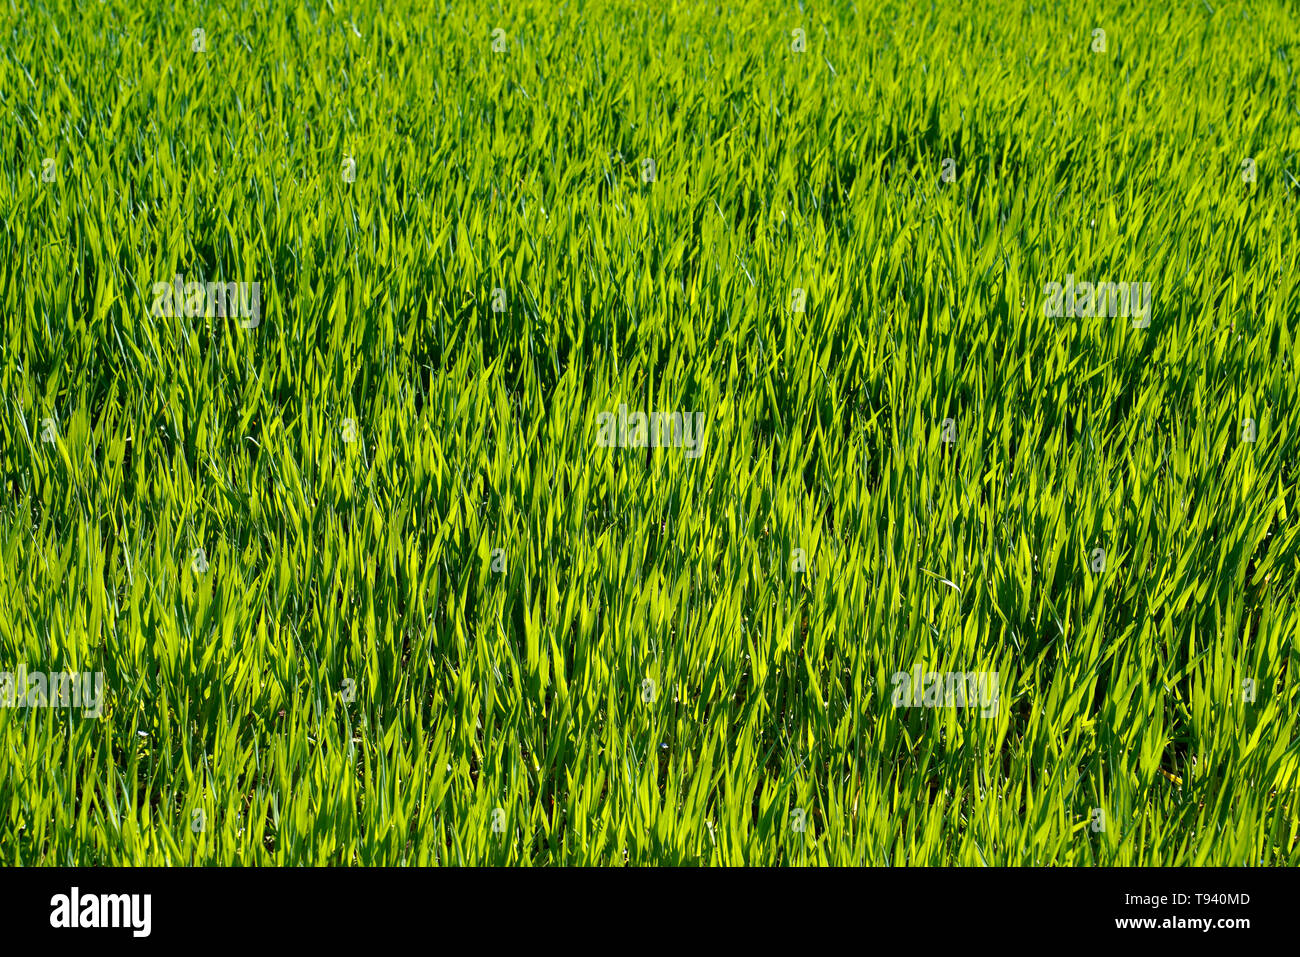 Spring field with cereals Stock Photo